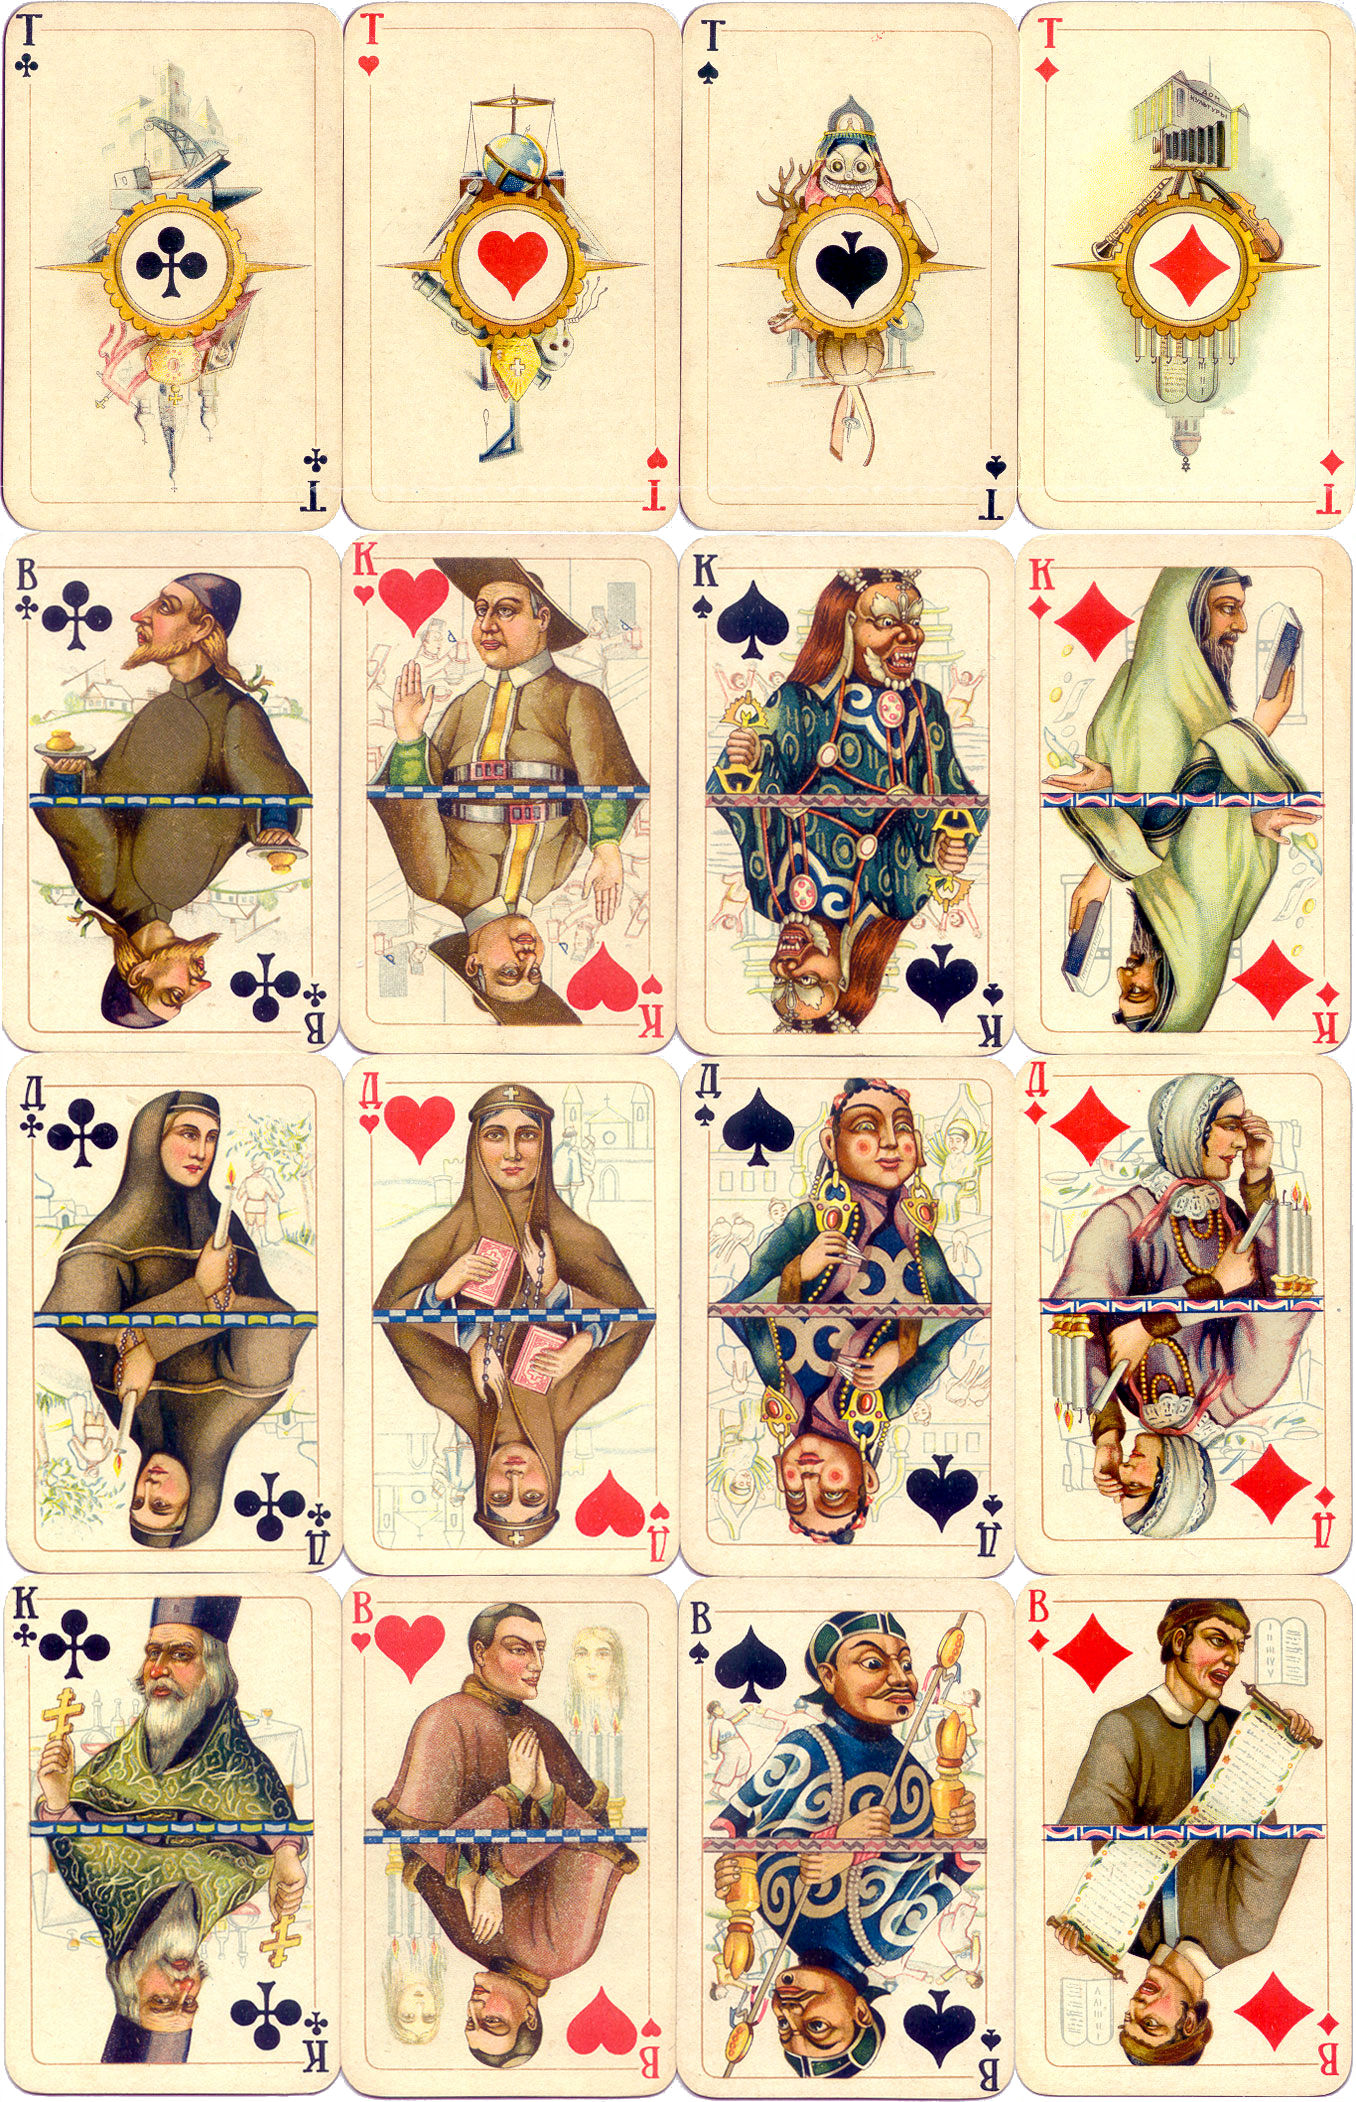 Russian “Anti-Religions” Playing Cards printed by chromolithography, 1930s